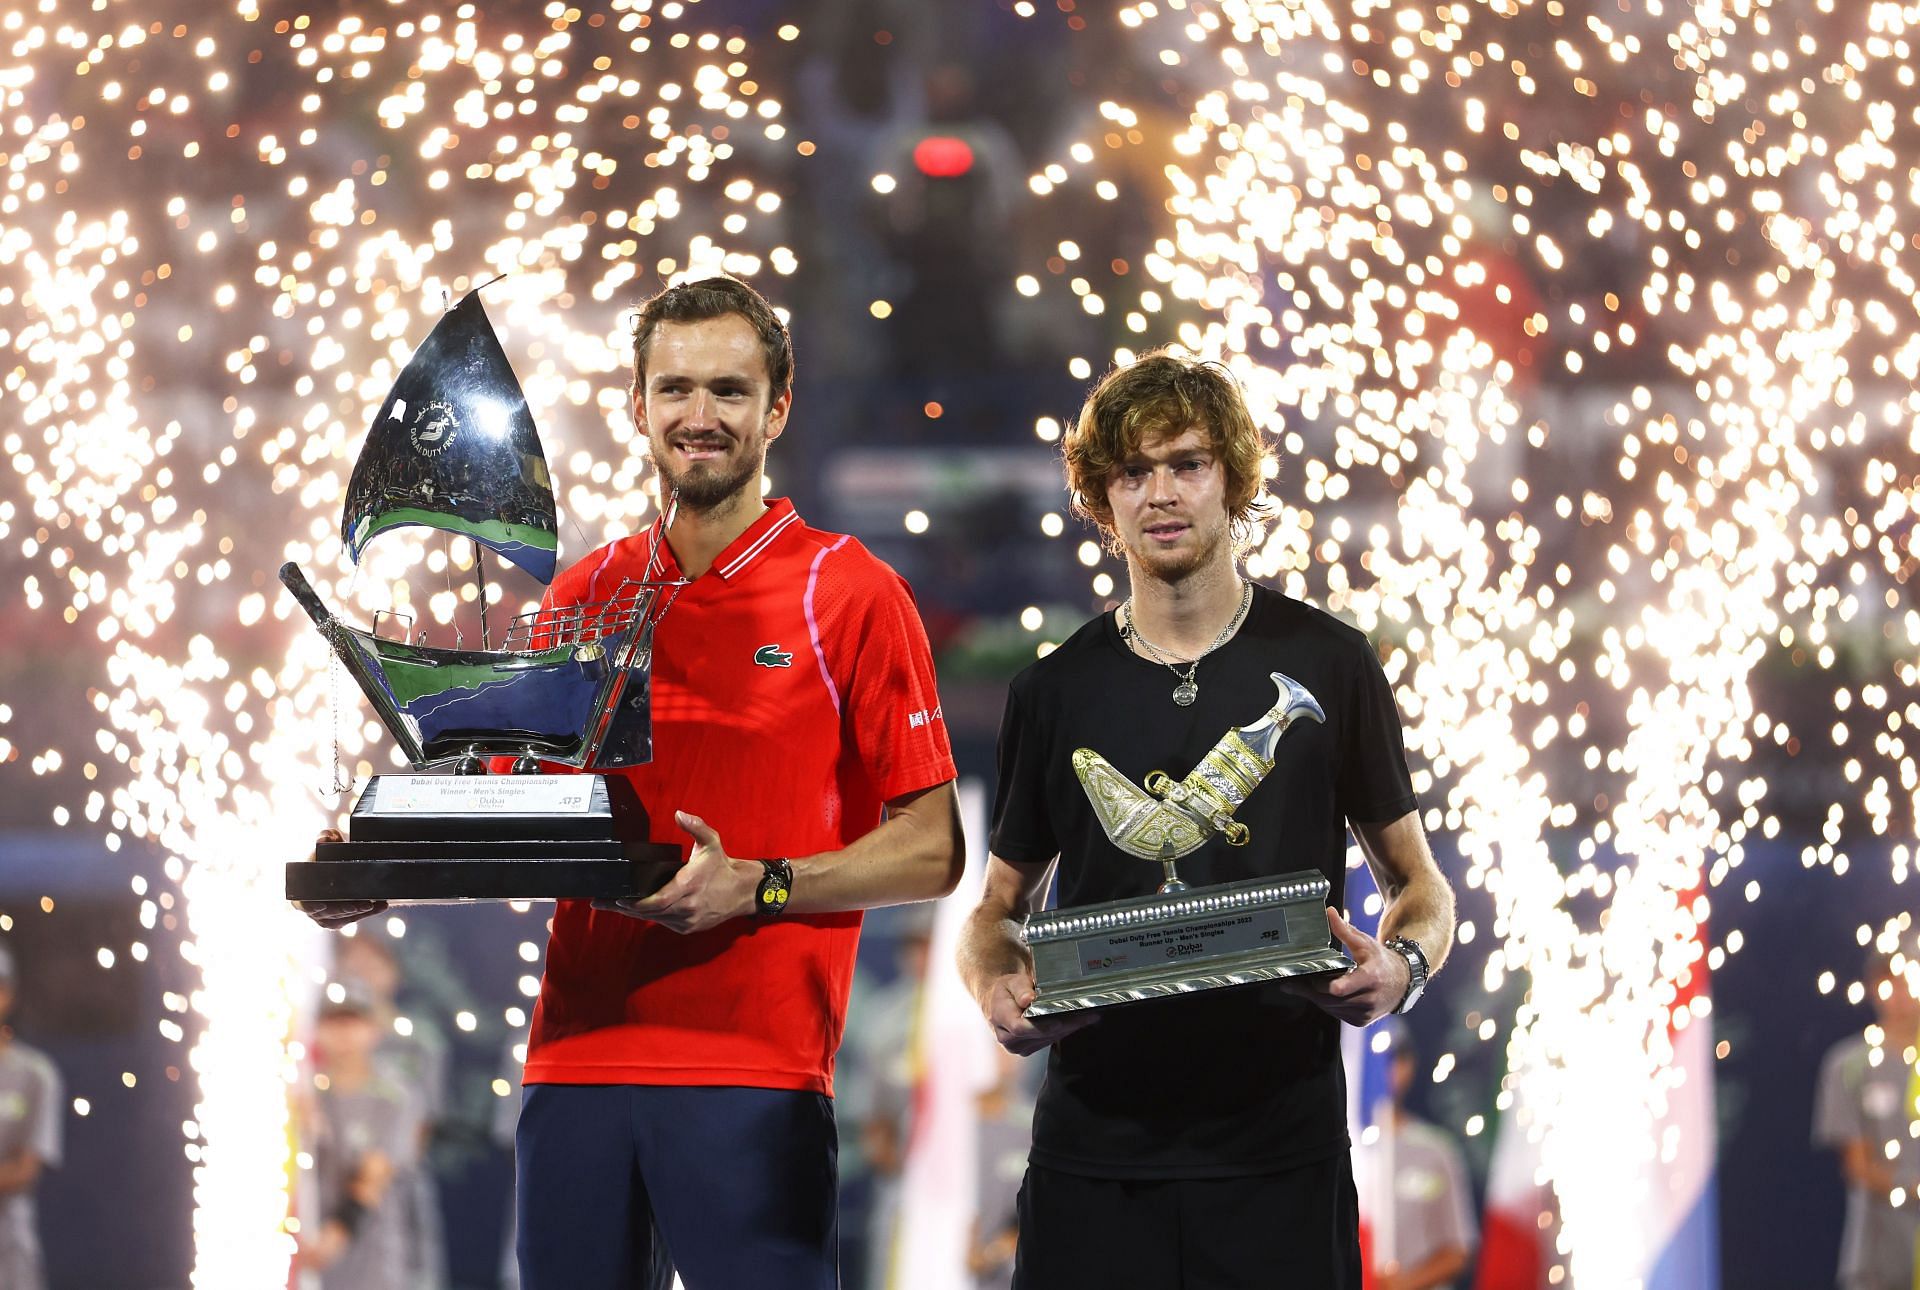 Medvedev and Rublev at the Dubai Tennis Championships